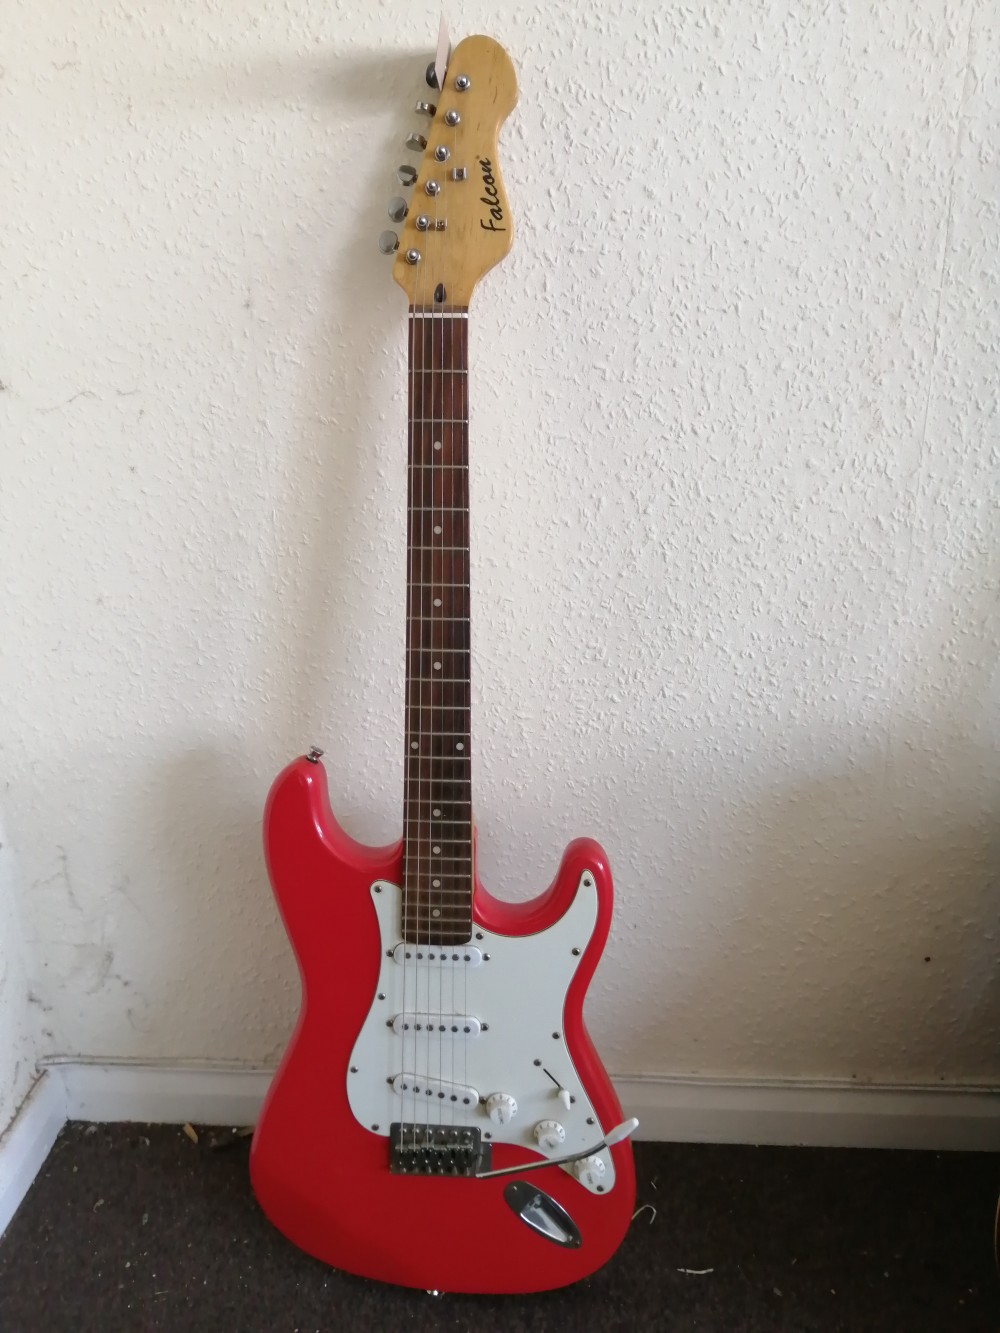 A Falcon Strat-style electric guitar